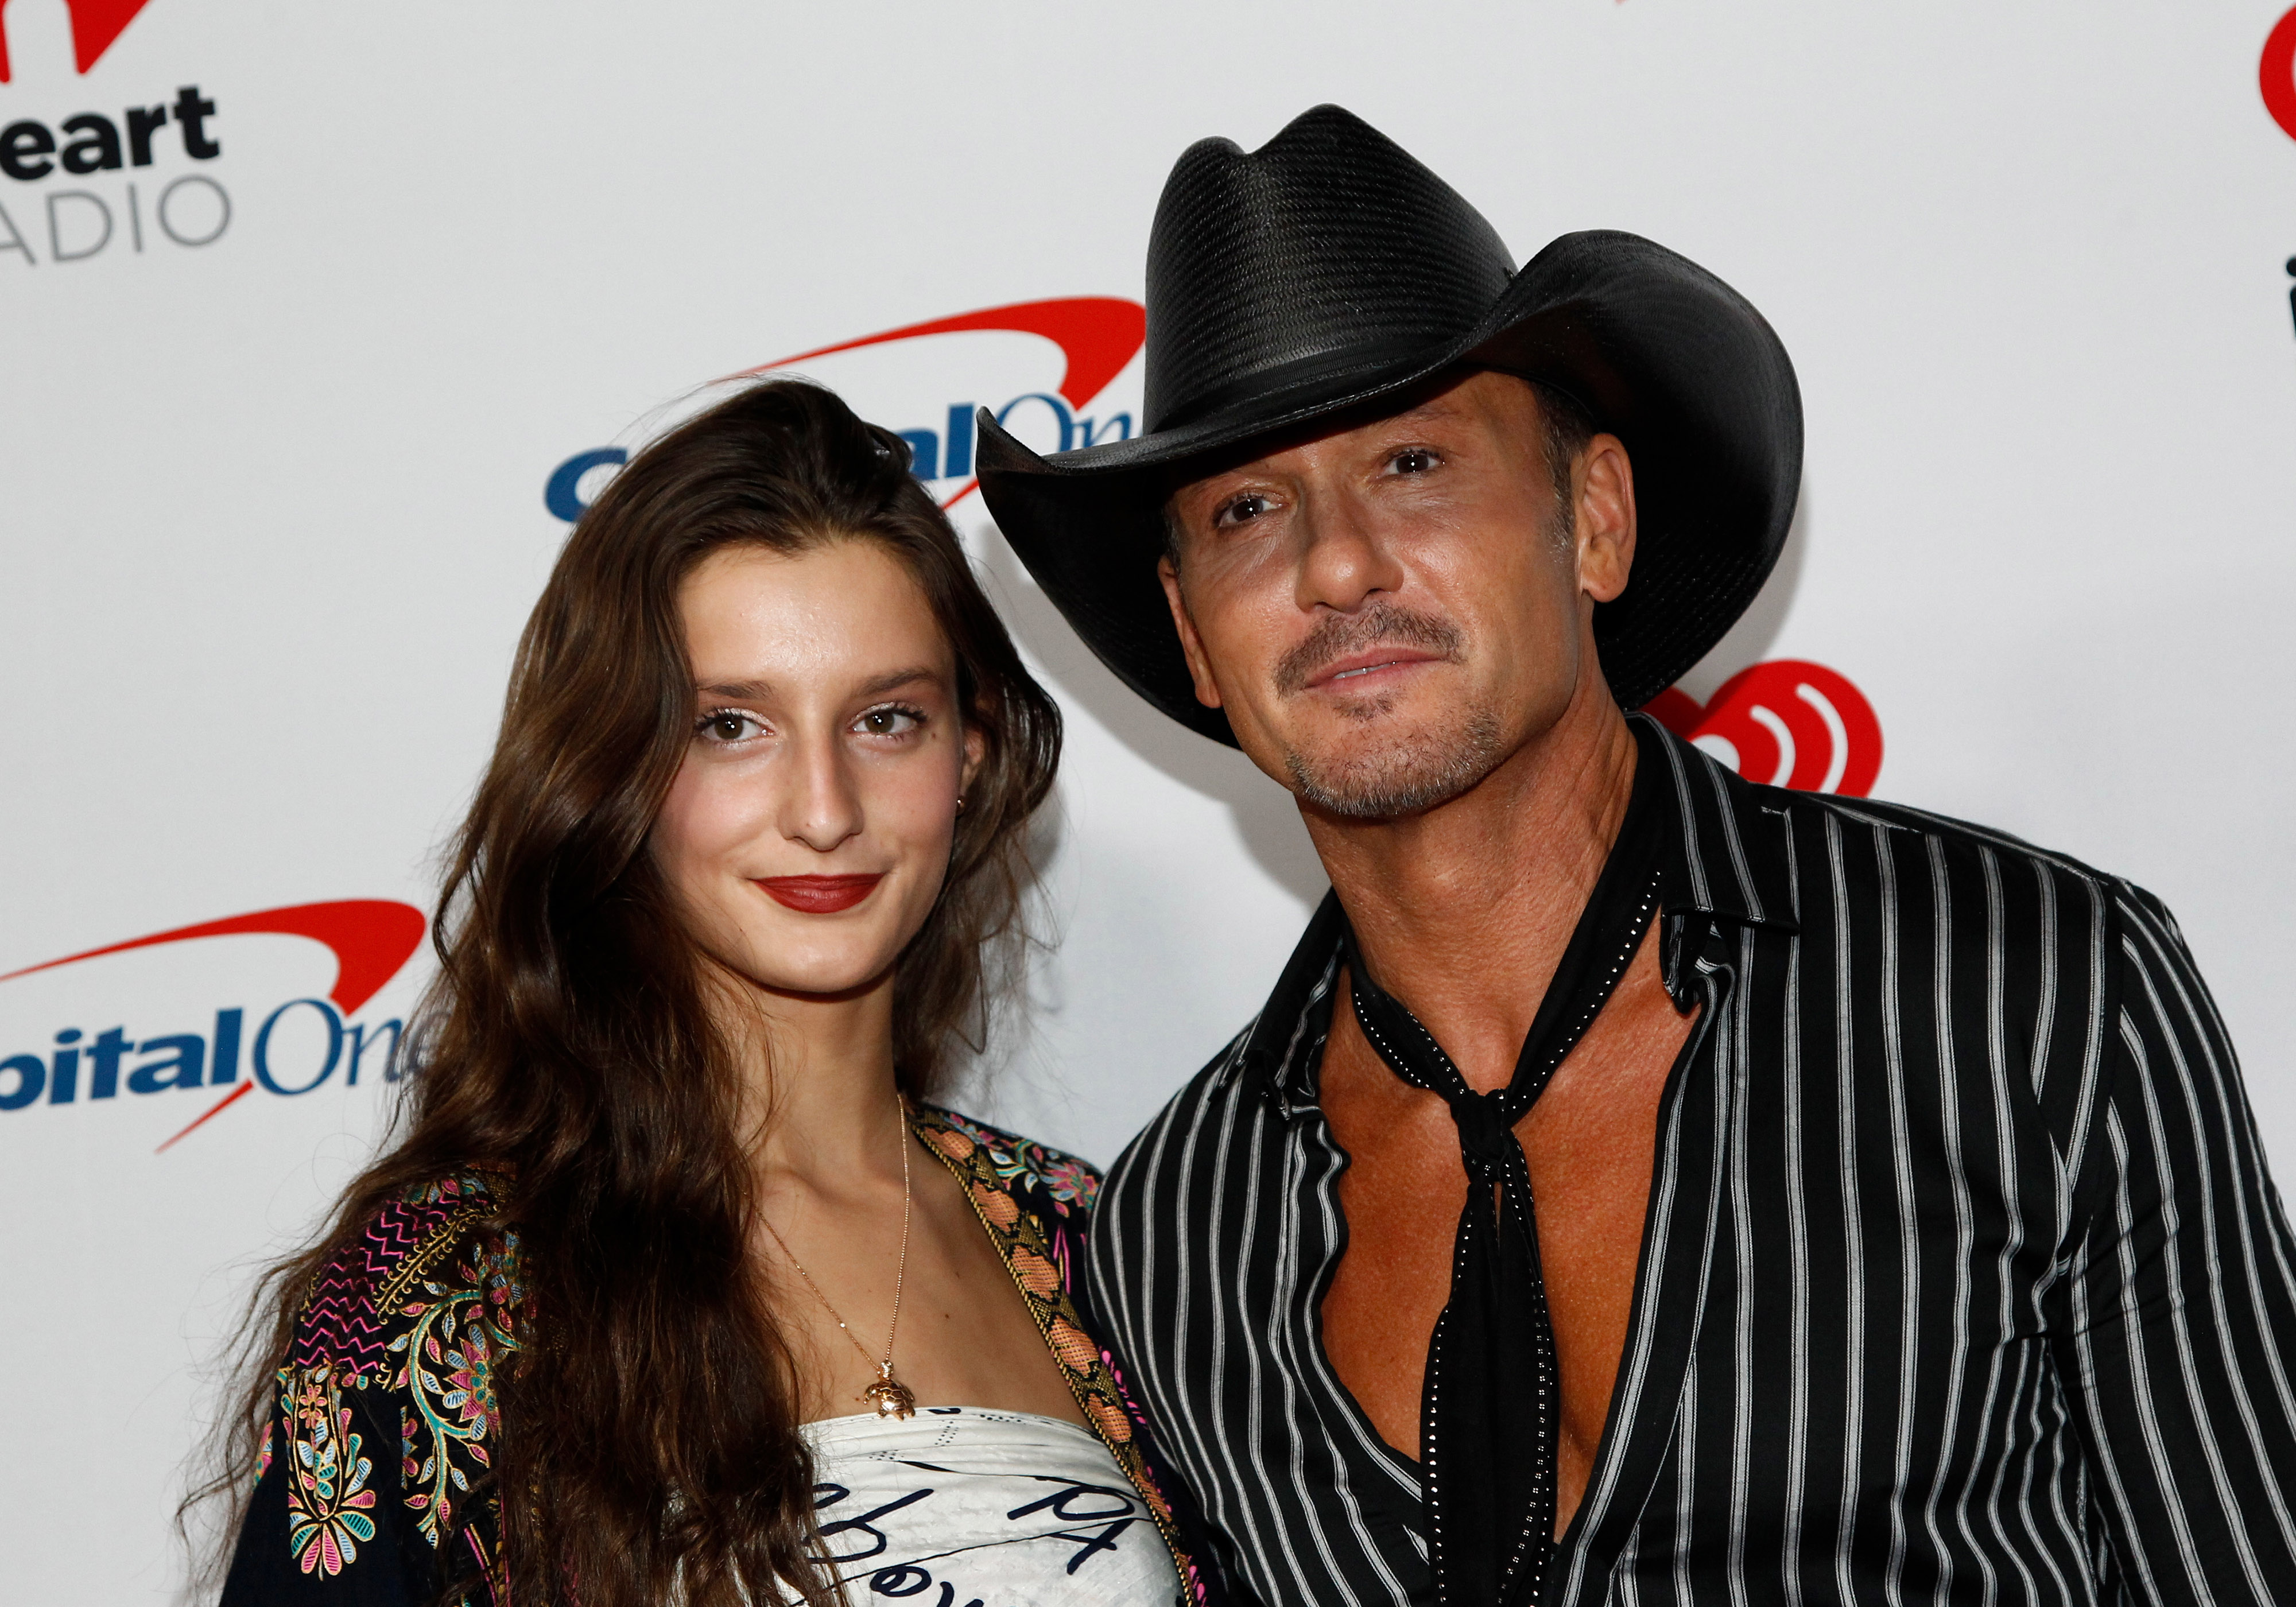 Tim McGraw and Faith Hill's three daughters look so different in